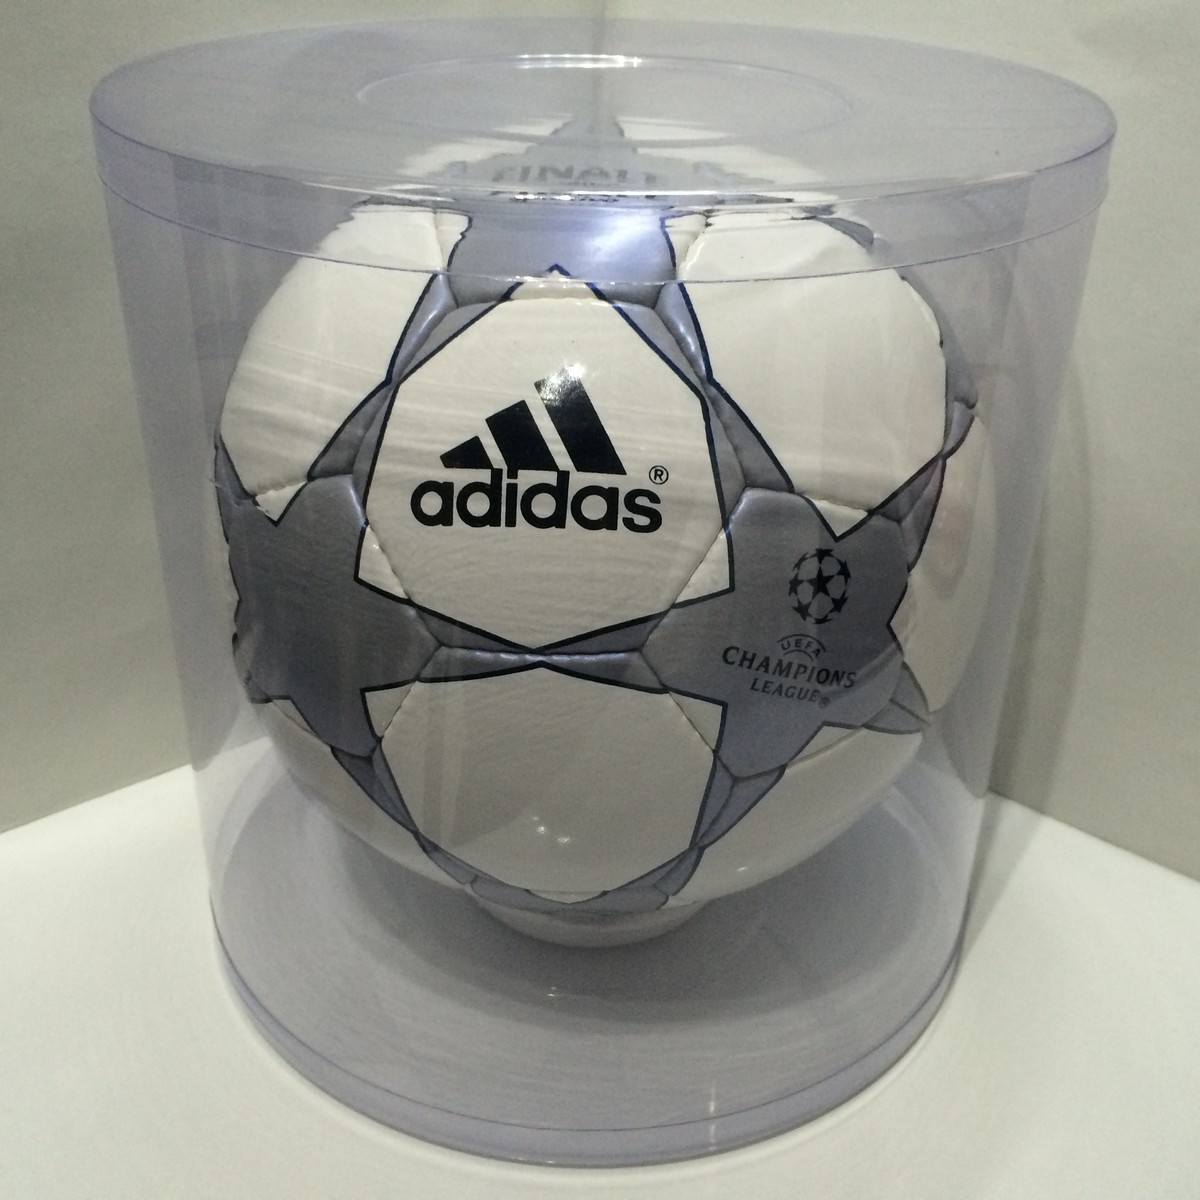 World's most expensive football: £4,000 Louis Vuitton ball savaged in review